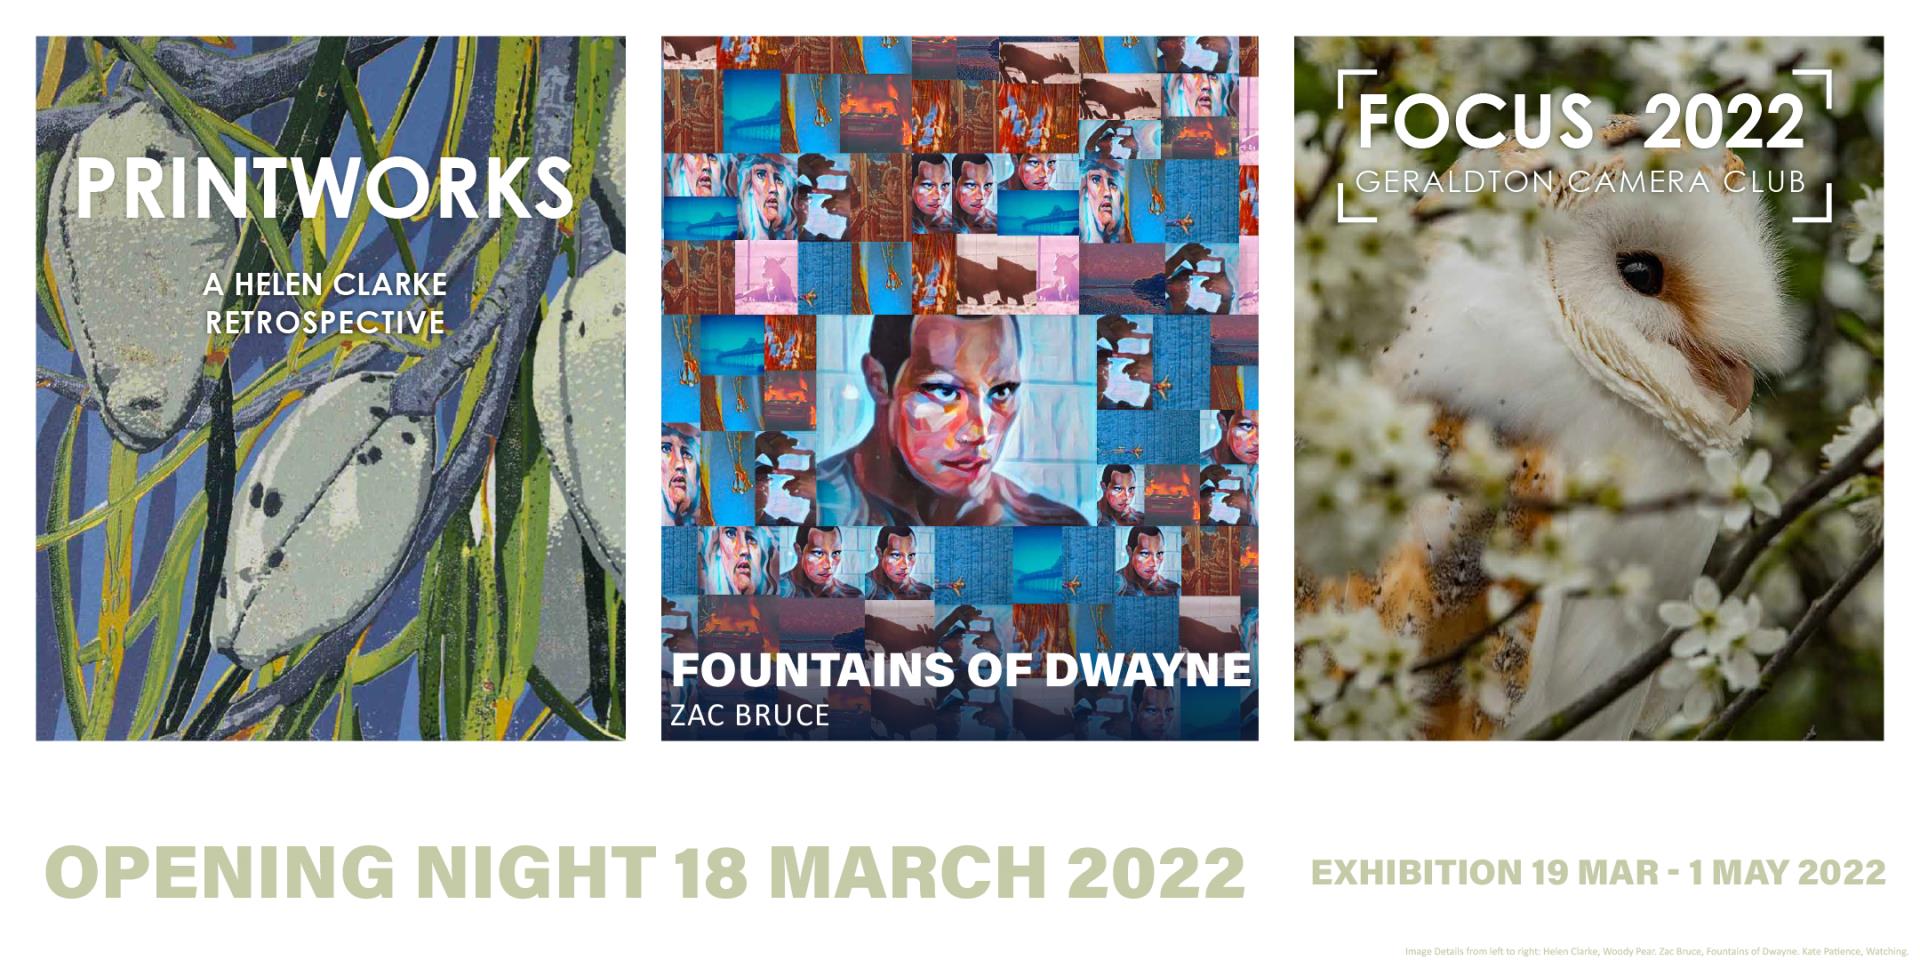 Exhibition Openings: PRINTWORKS | Fountains of Dwayne | FOCUS 2022